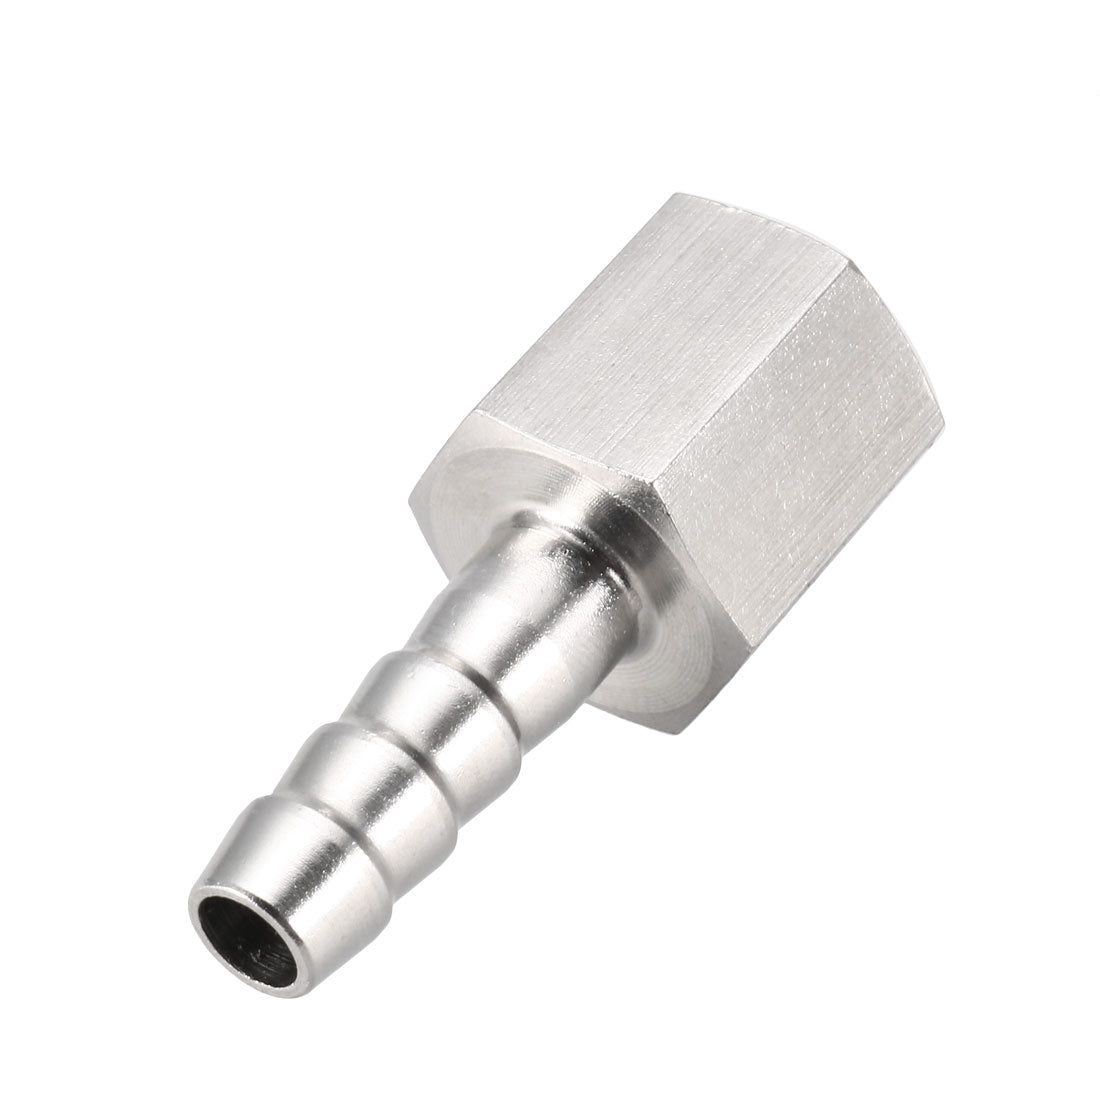 uxcell Uxcell Stainless Steel Barb Hose Fitting Connector Adapter 8mm Barbed x M14 Female Pipe 1Pcs